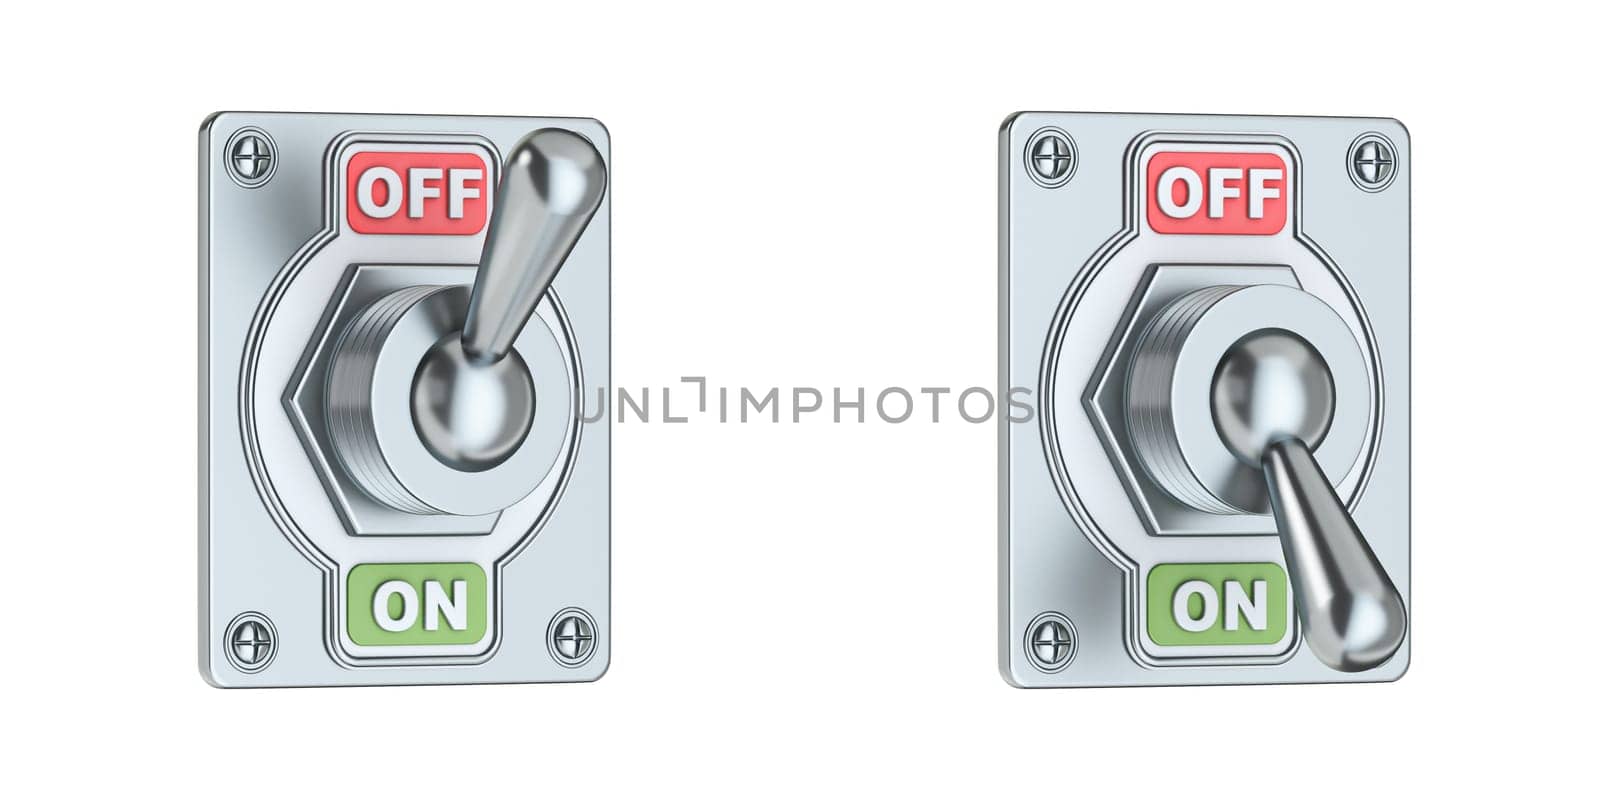 Metal buttons switch on and off 3D rendering illustration isolated on white background